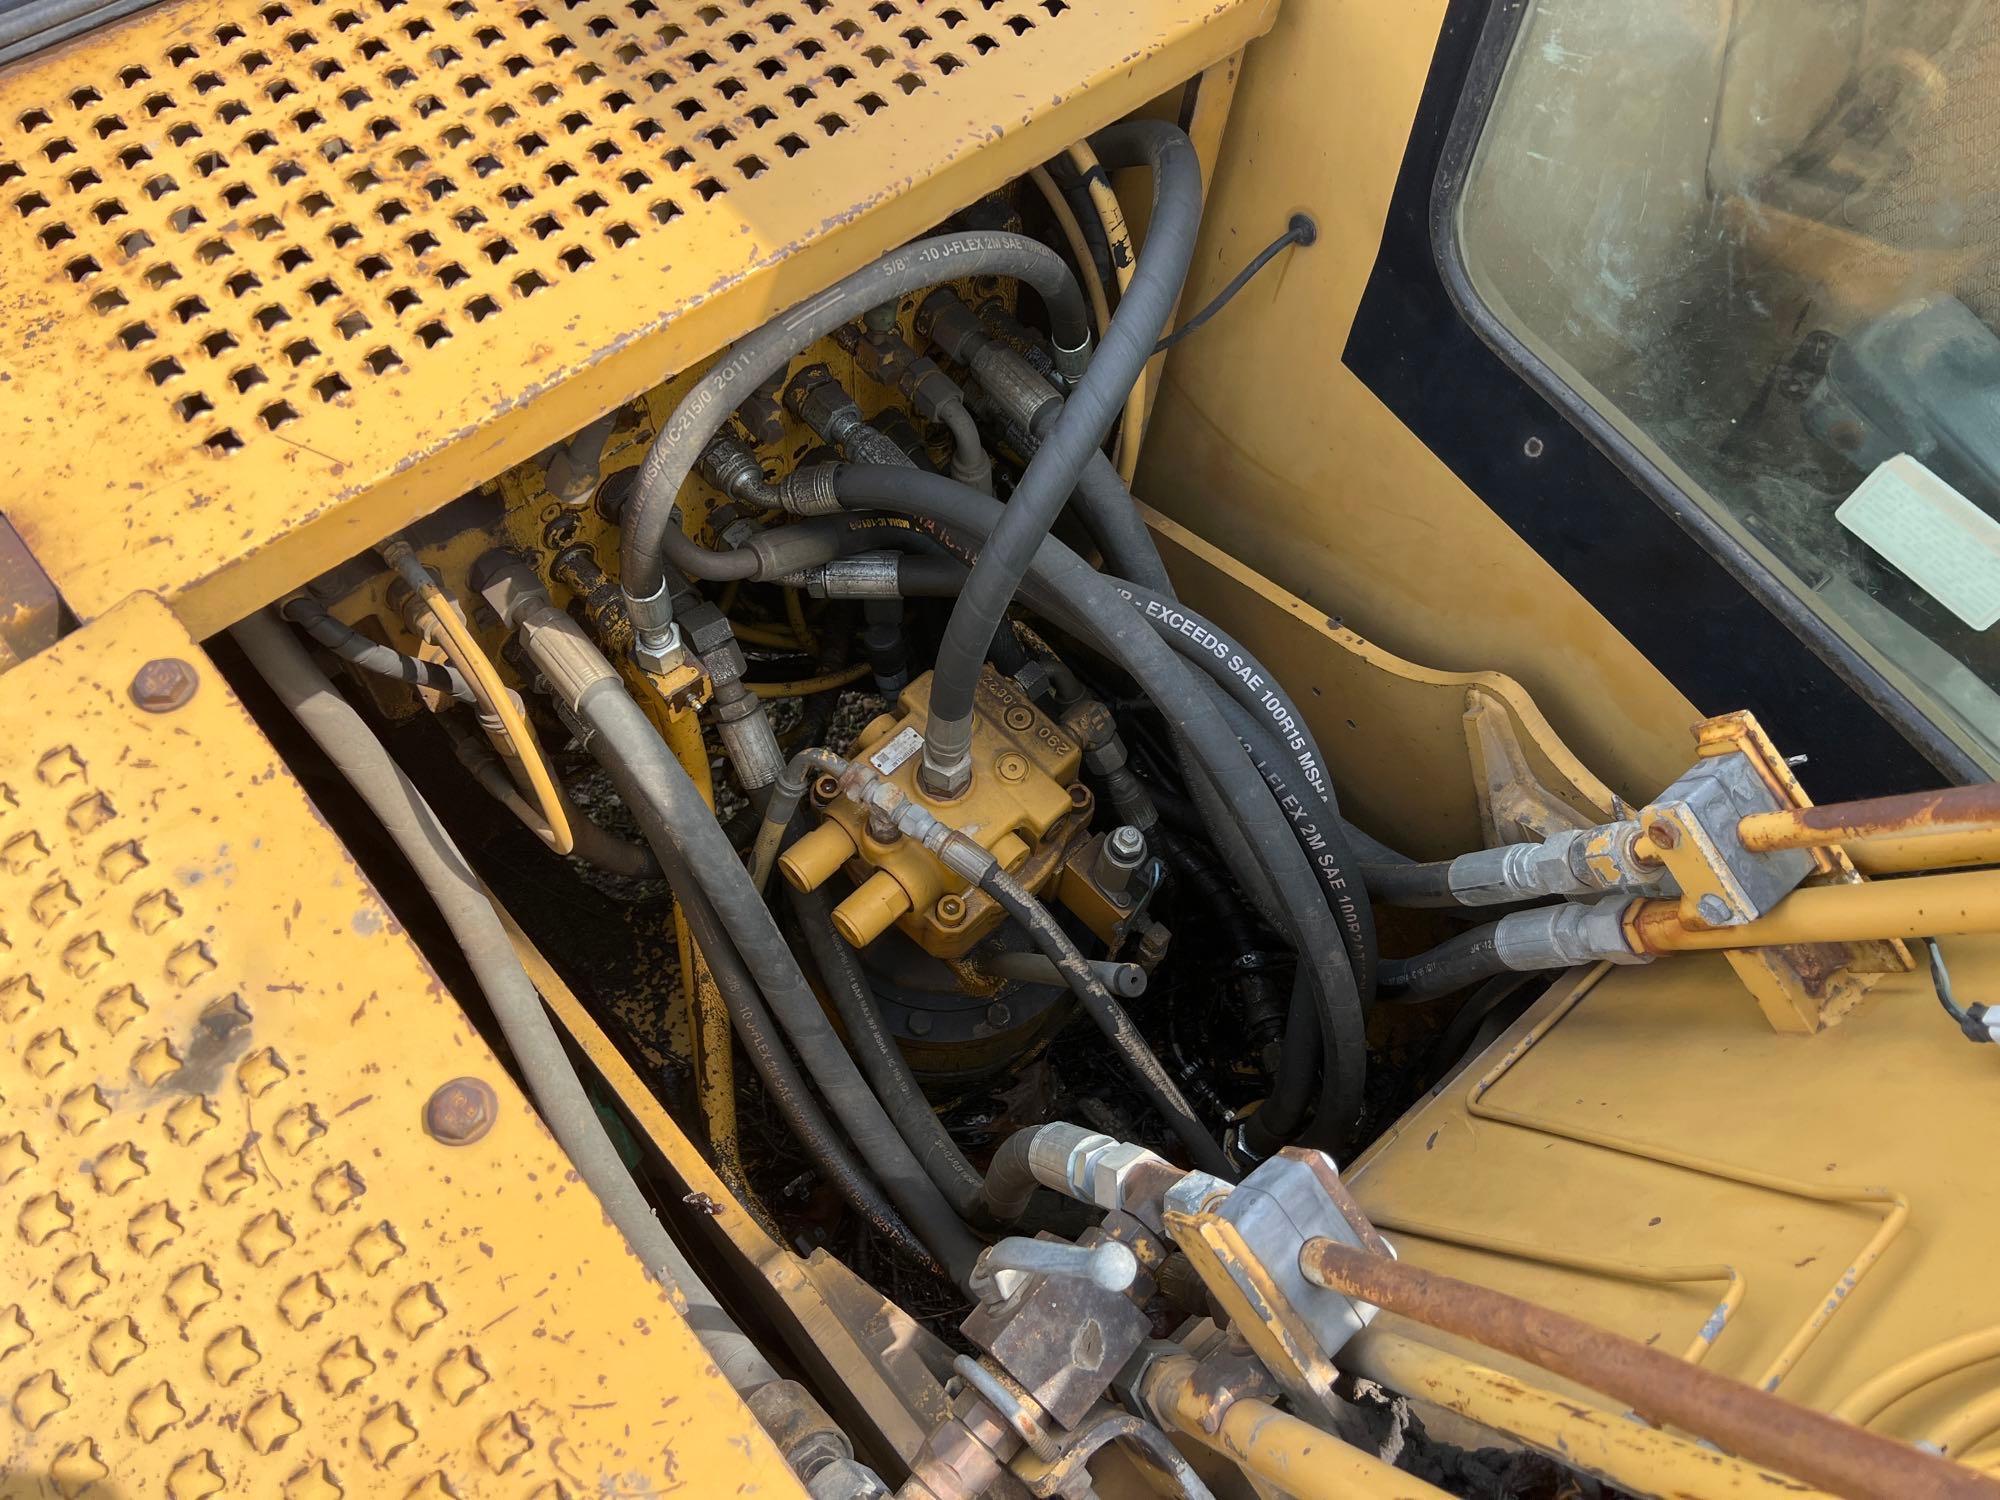 CAT 312BL HYDRAULIC EXCAVATOR SN:8JR01288 powered by Cat 3064T diesel engine, equipped with Cab,